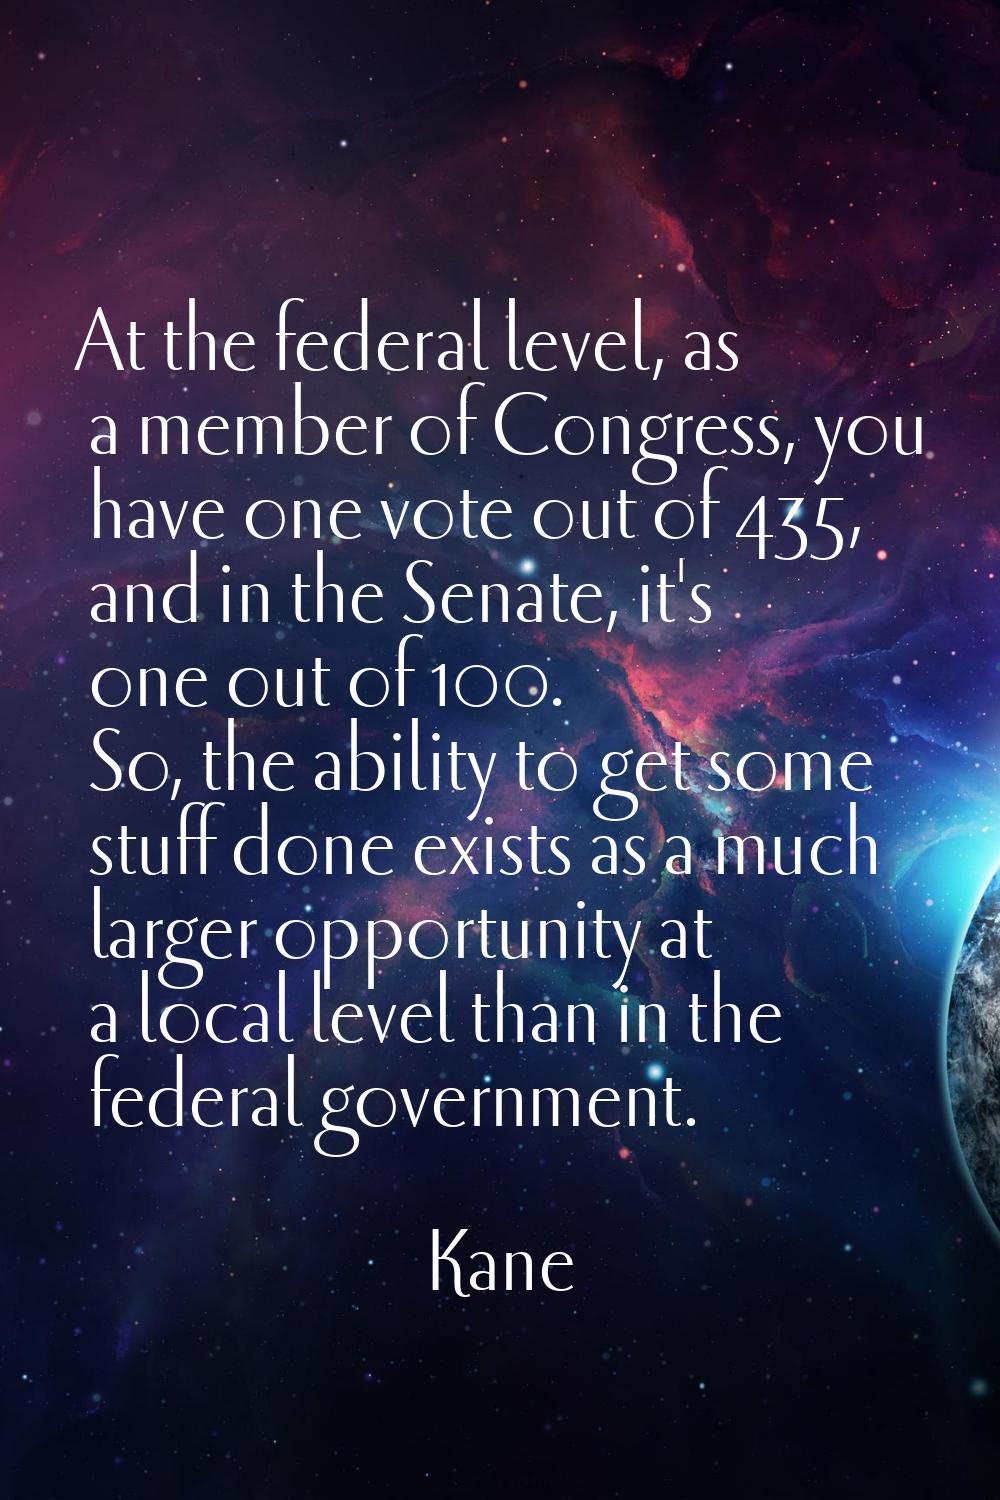 At the federal level, as a member of Congress, you have one vote out of 435, and in the Senate, it'